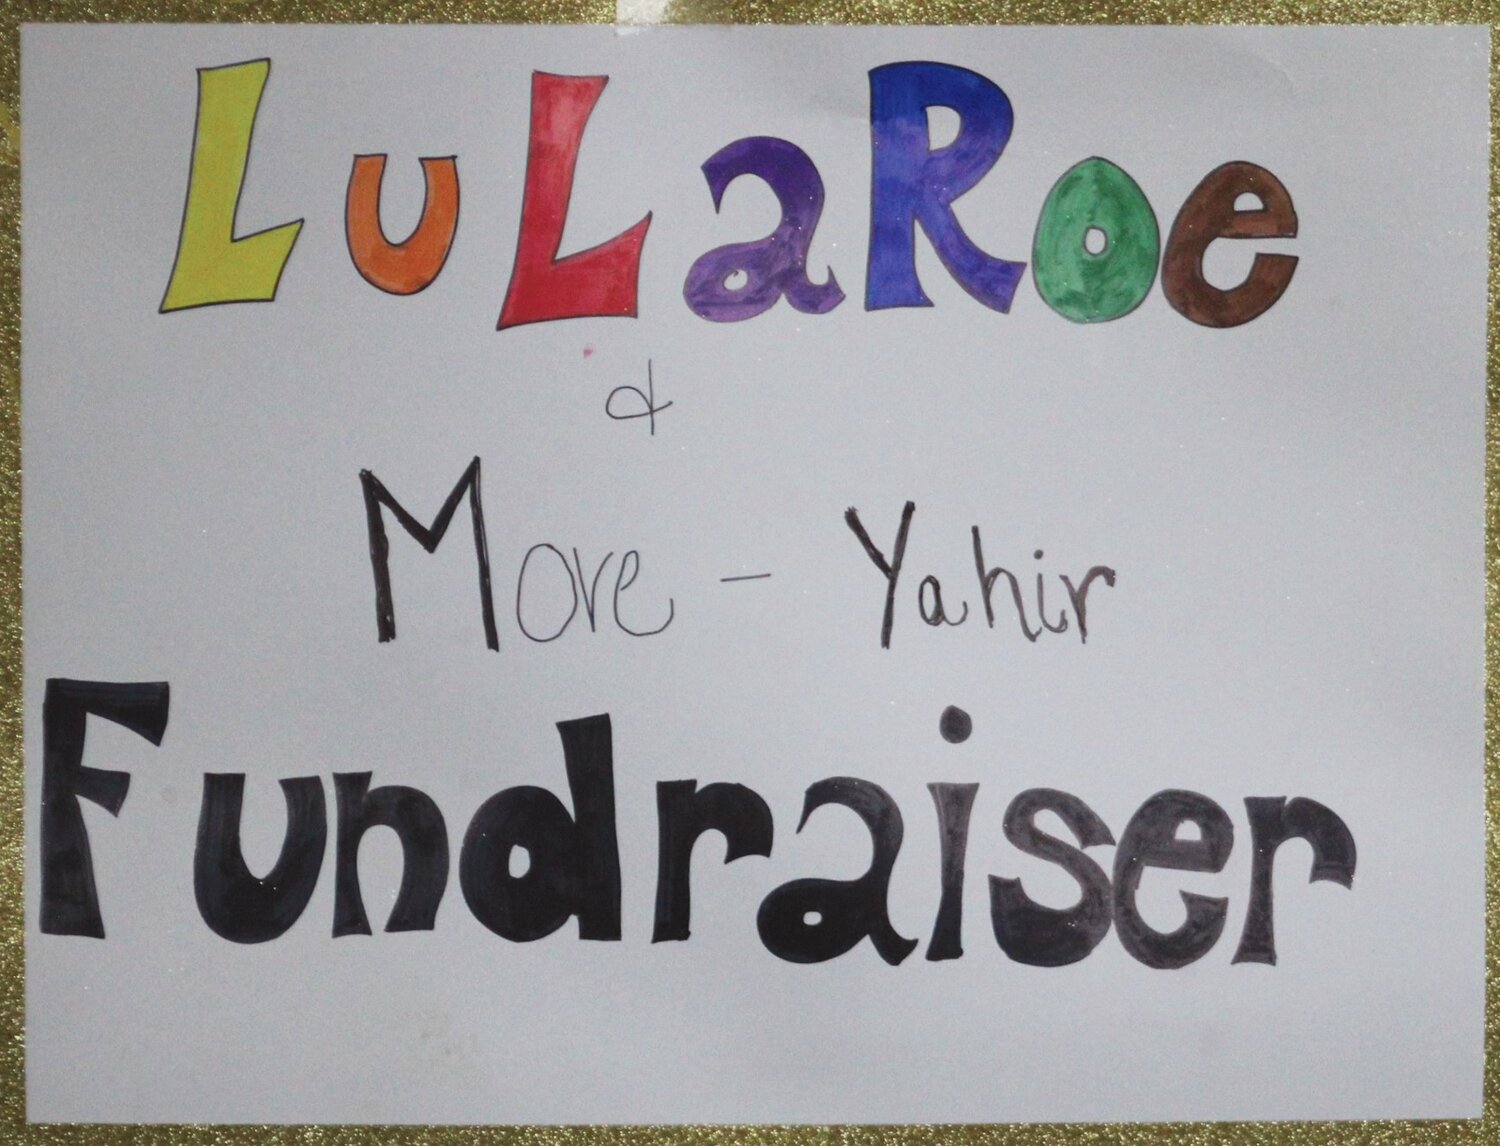 The sign outside the doors said it all last Sunday as fans of the LuLaRoe clothing line patronized the Commons room from Noon to 4 p.m. to raise funds for 10-year-old cancer victim Yahir Corona.